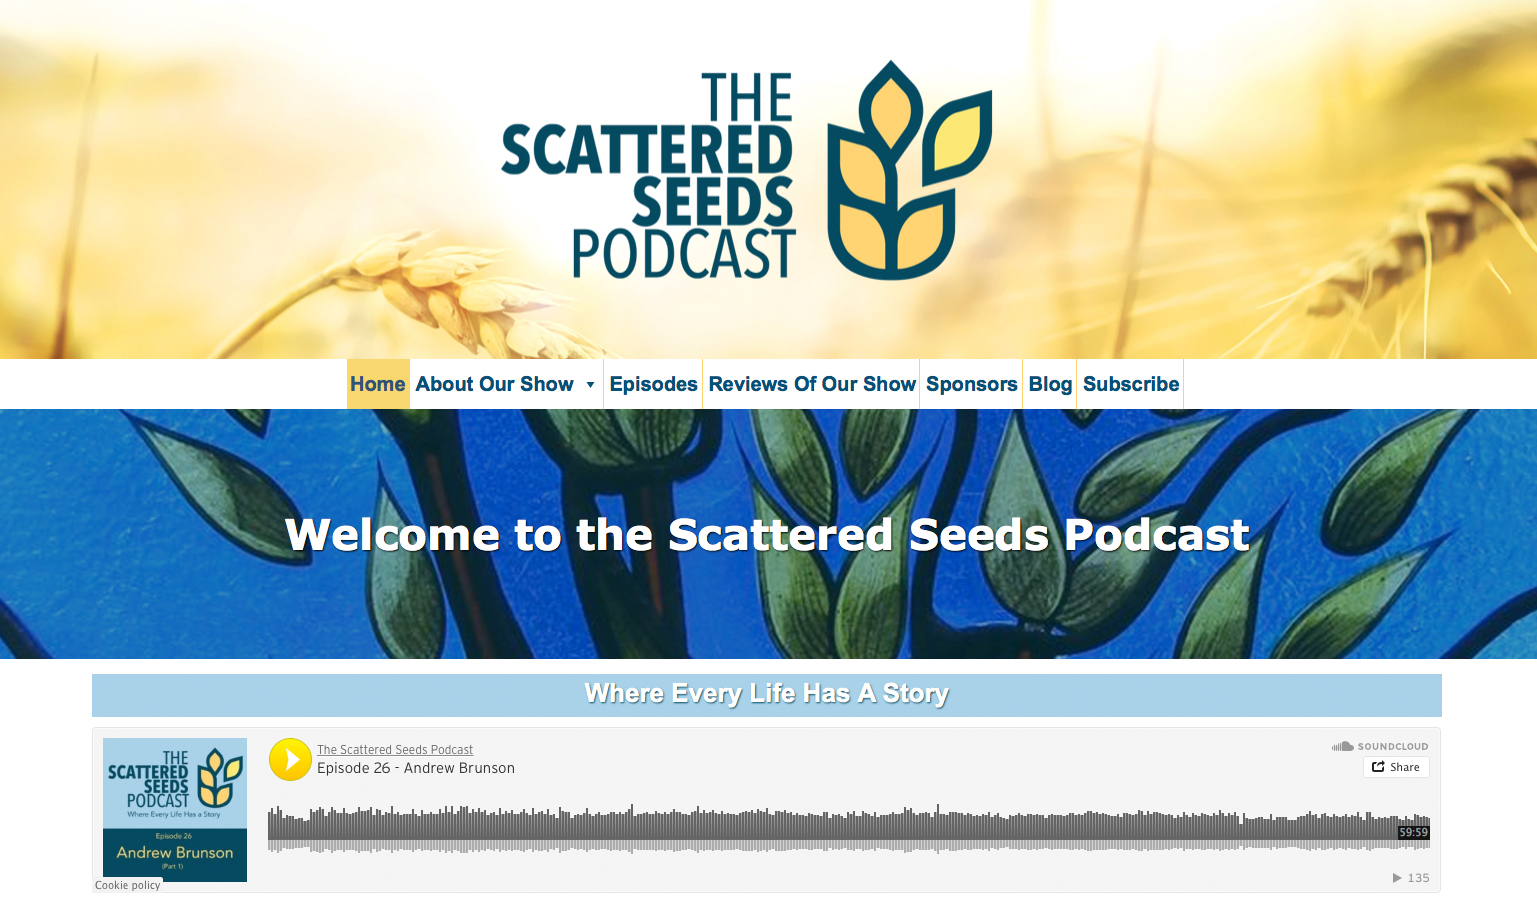 The Scattered Seeds Podcast